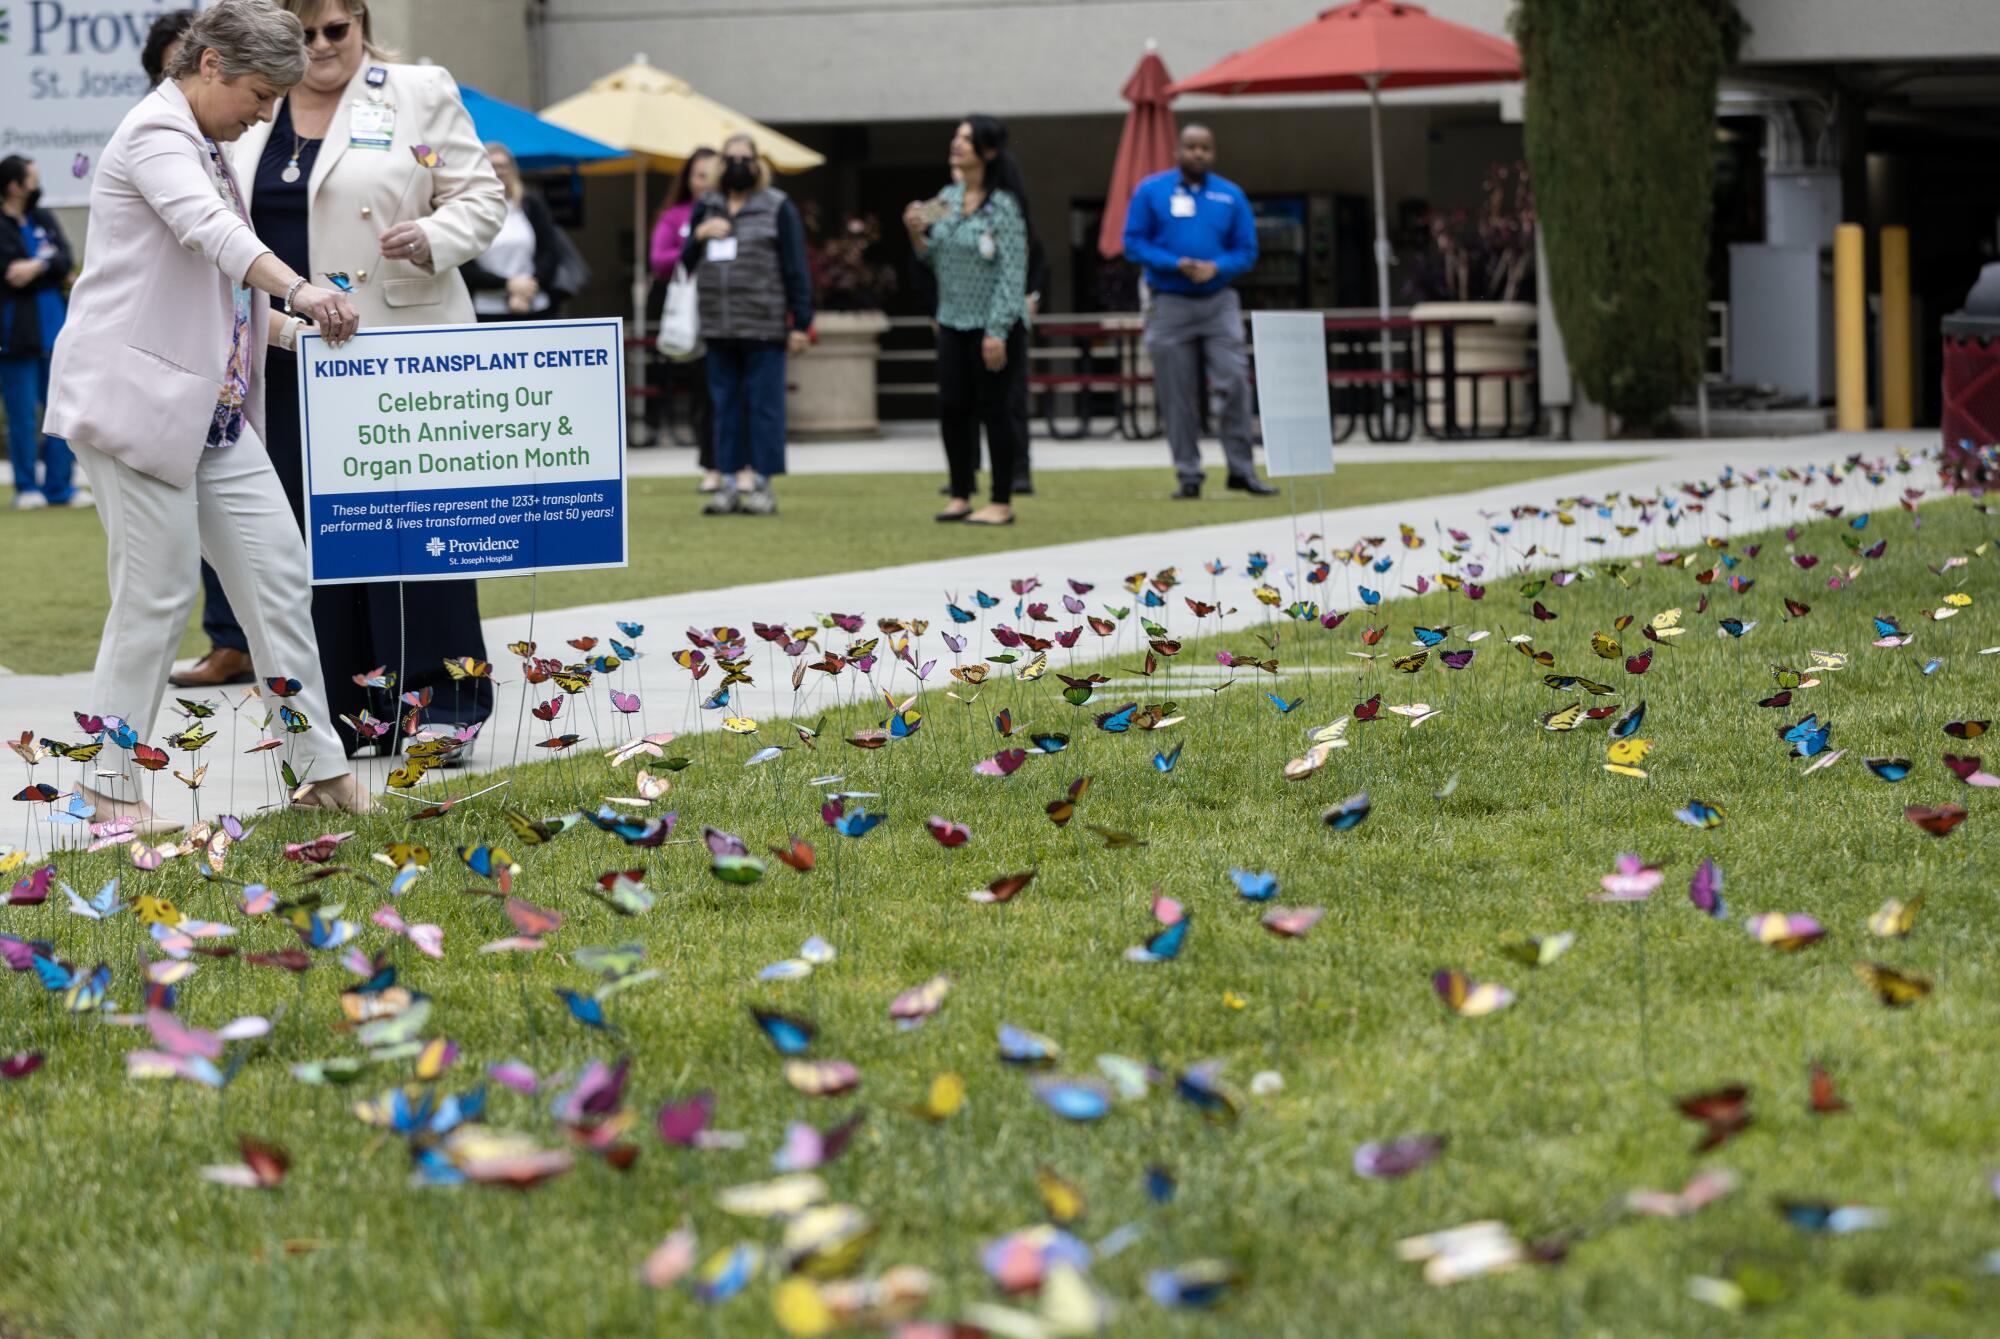 A display of crafted butterflies on a lawn by a sign reading "Kidney Transplant Center."